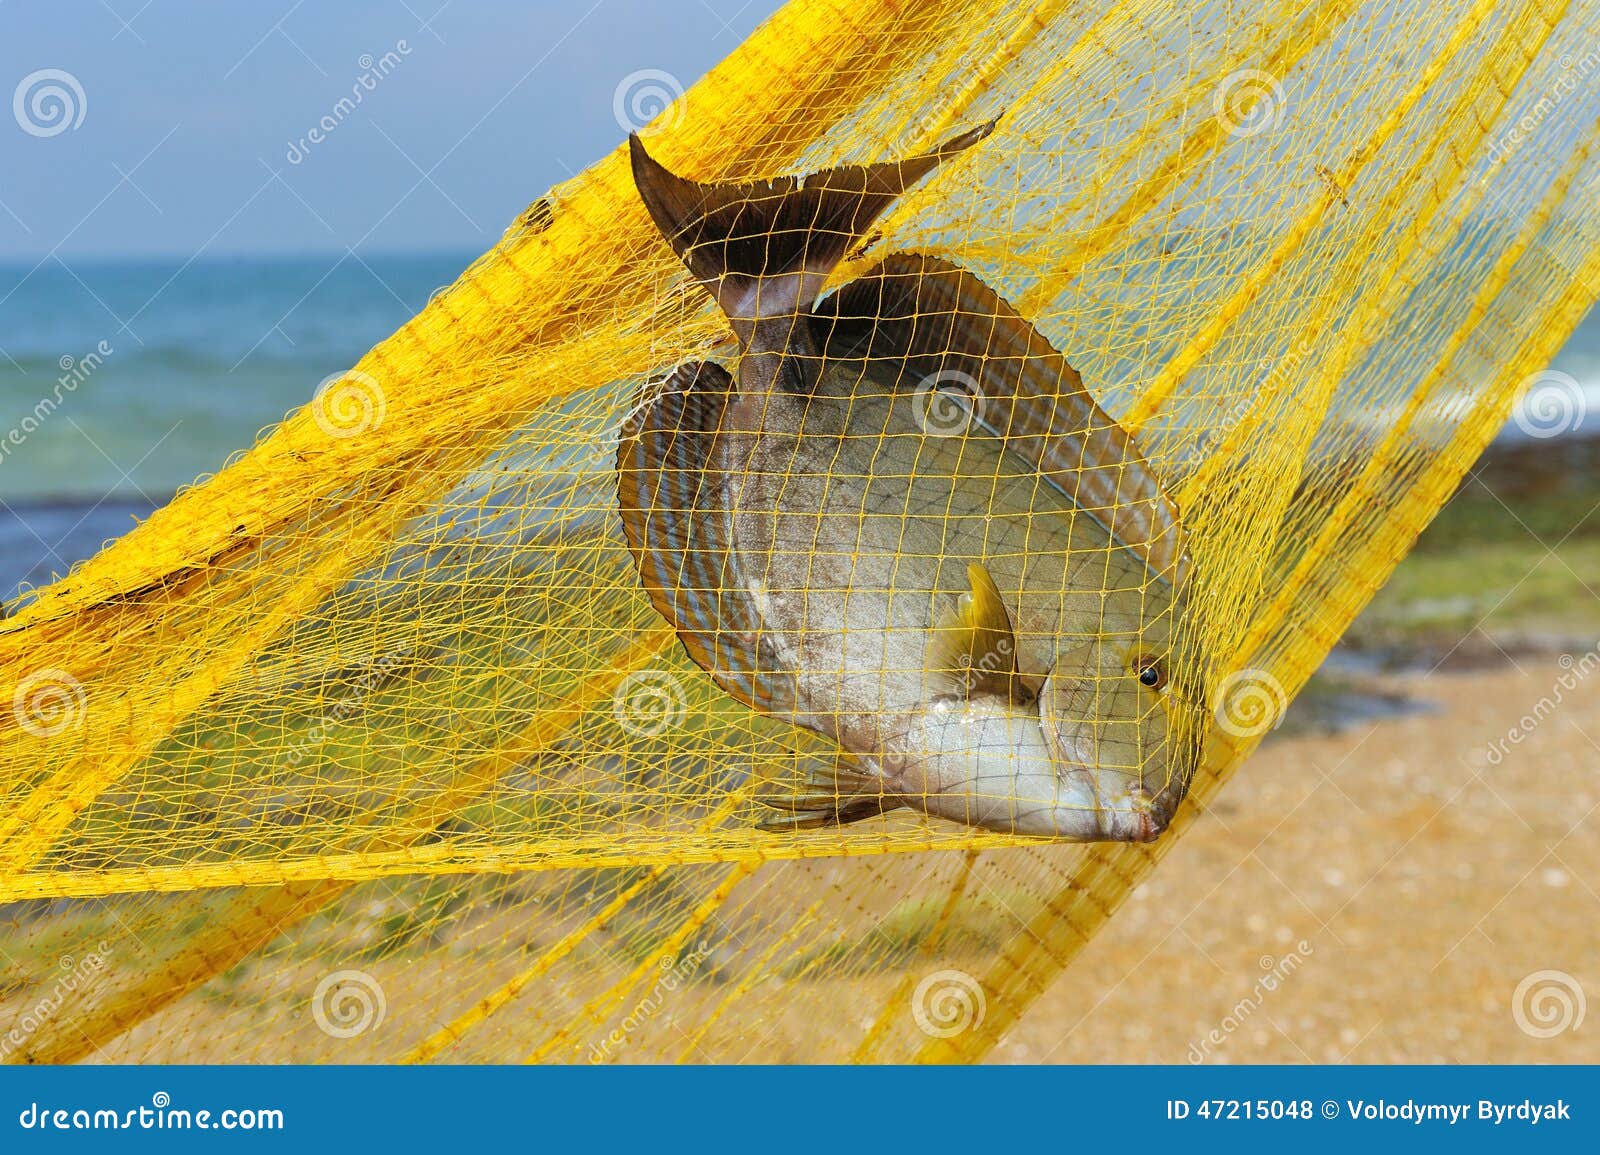 Fish in a fishing nets stock photo. Image of food, fisherman - 47215048